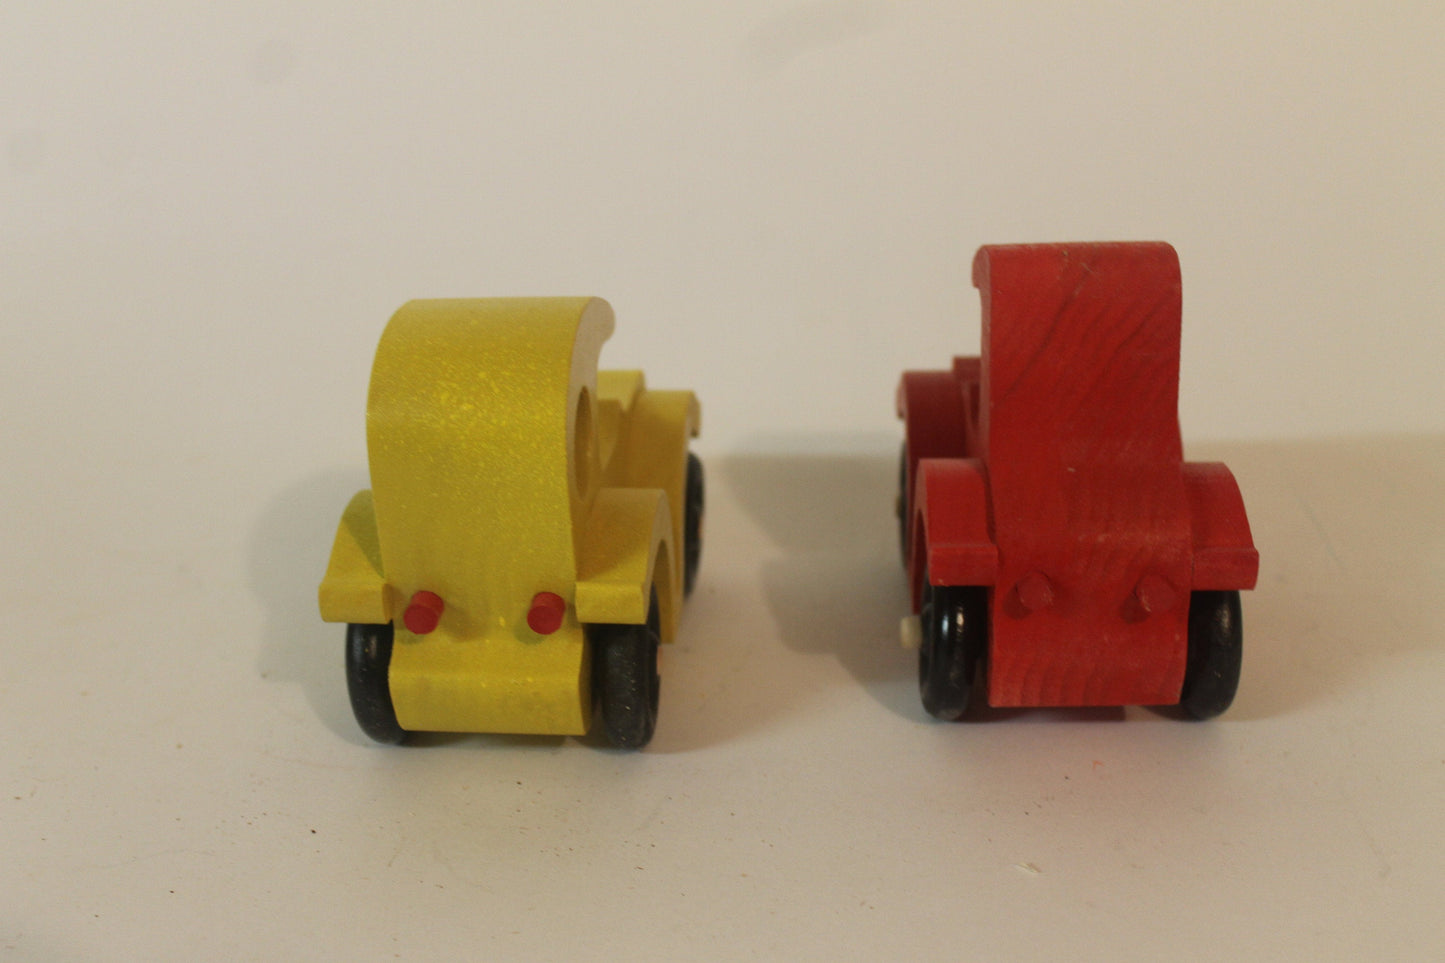 Two antique autos vehicle set. They are hand cut from solid poplar, have old type spoked wheels, and are painted bright red and yellow